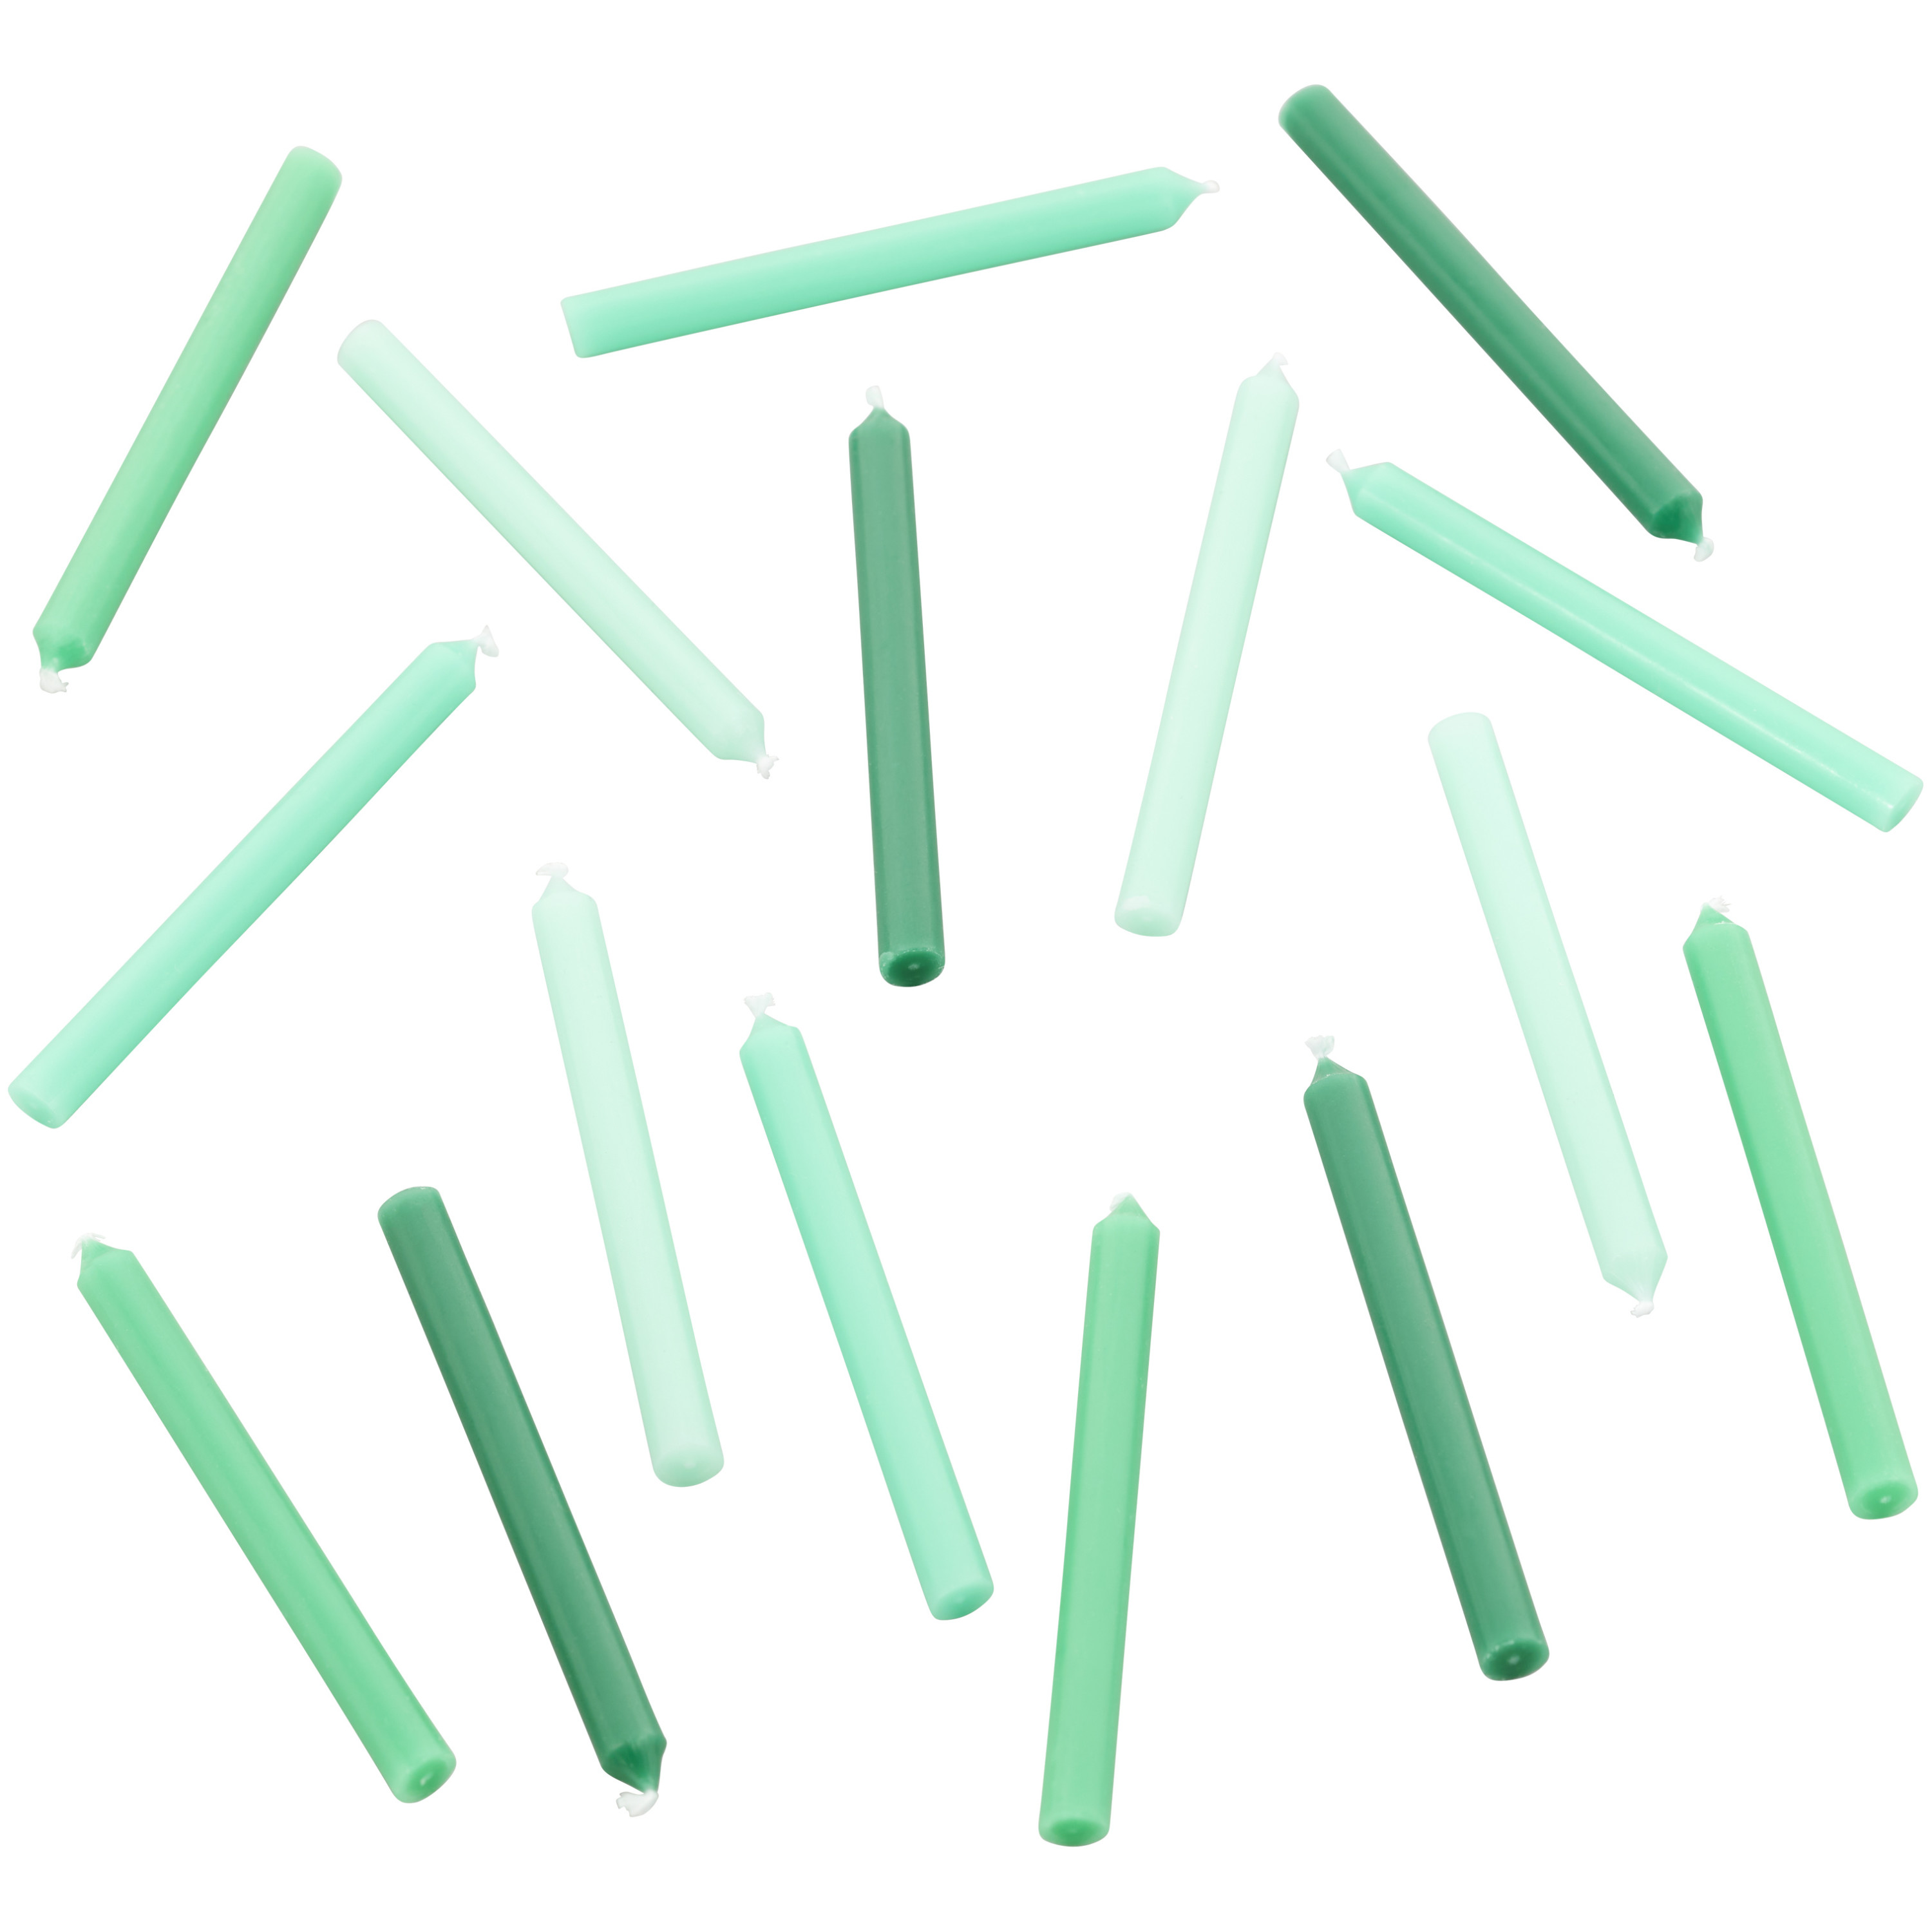 Wilton Light Green, Green and Dark Green Ombre Birthday Candles, 16-Count - image 3 of 4